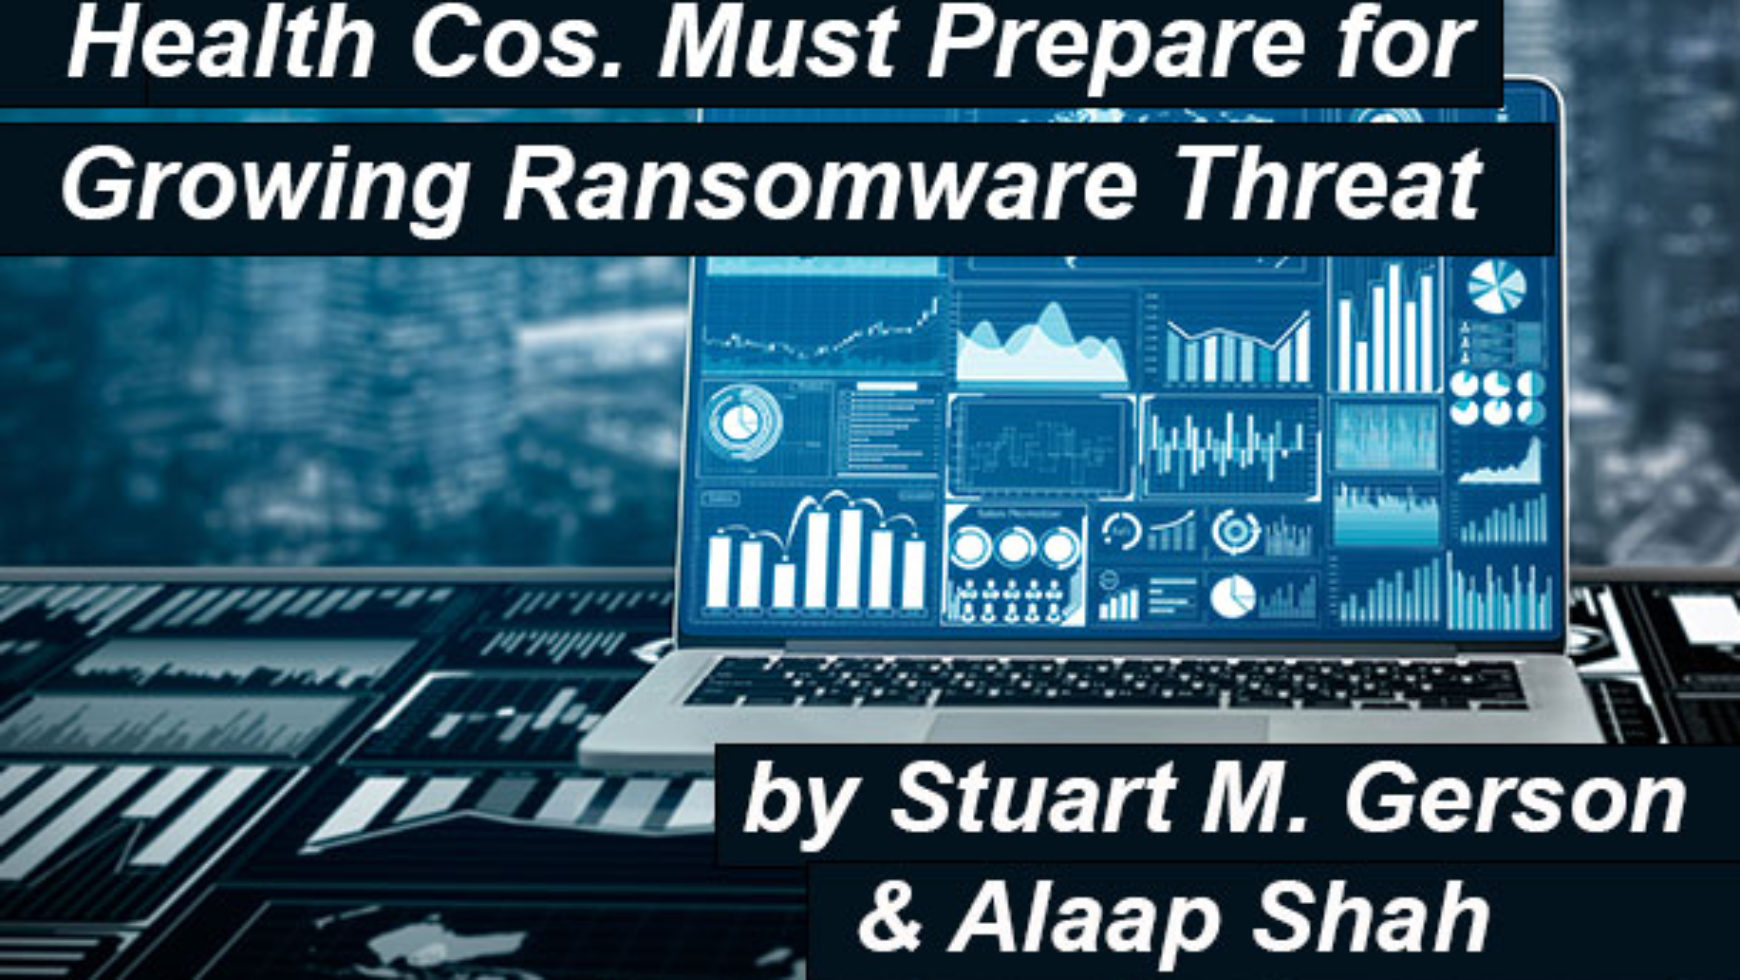 Health Cos. Must Prepare For Growing Ransomware Threat